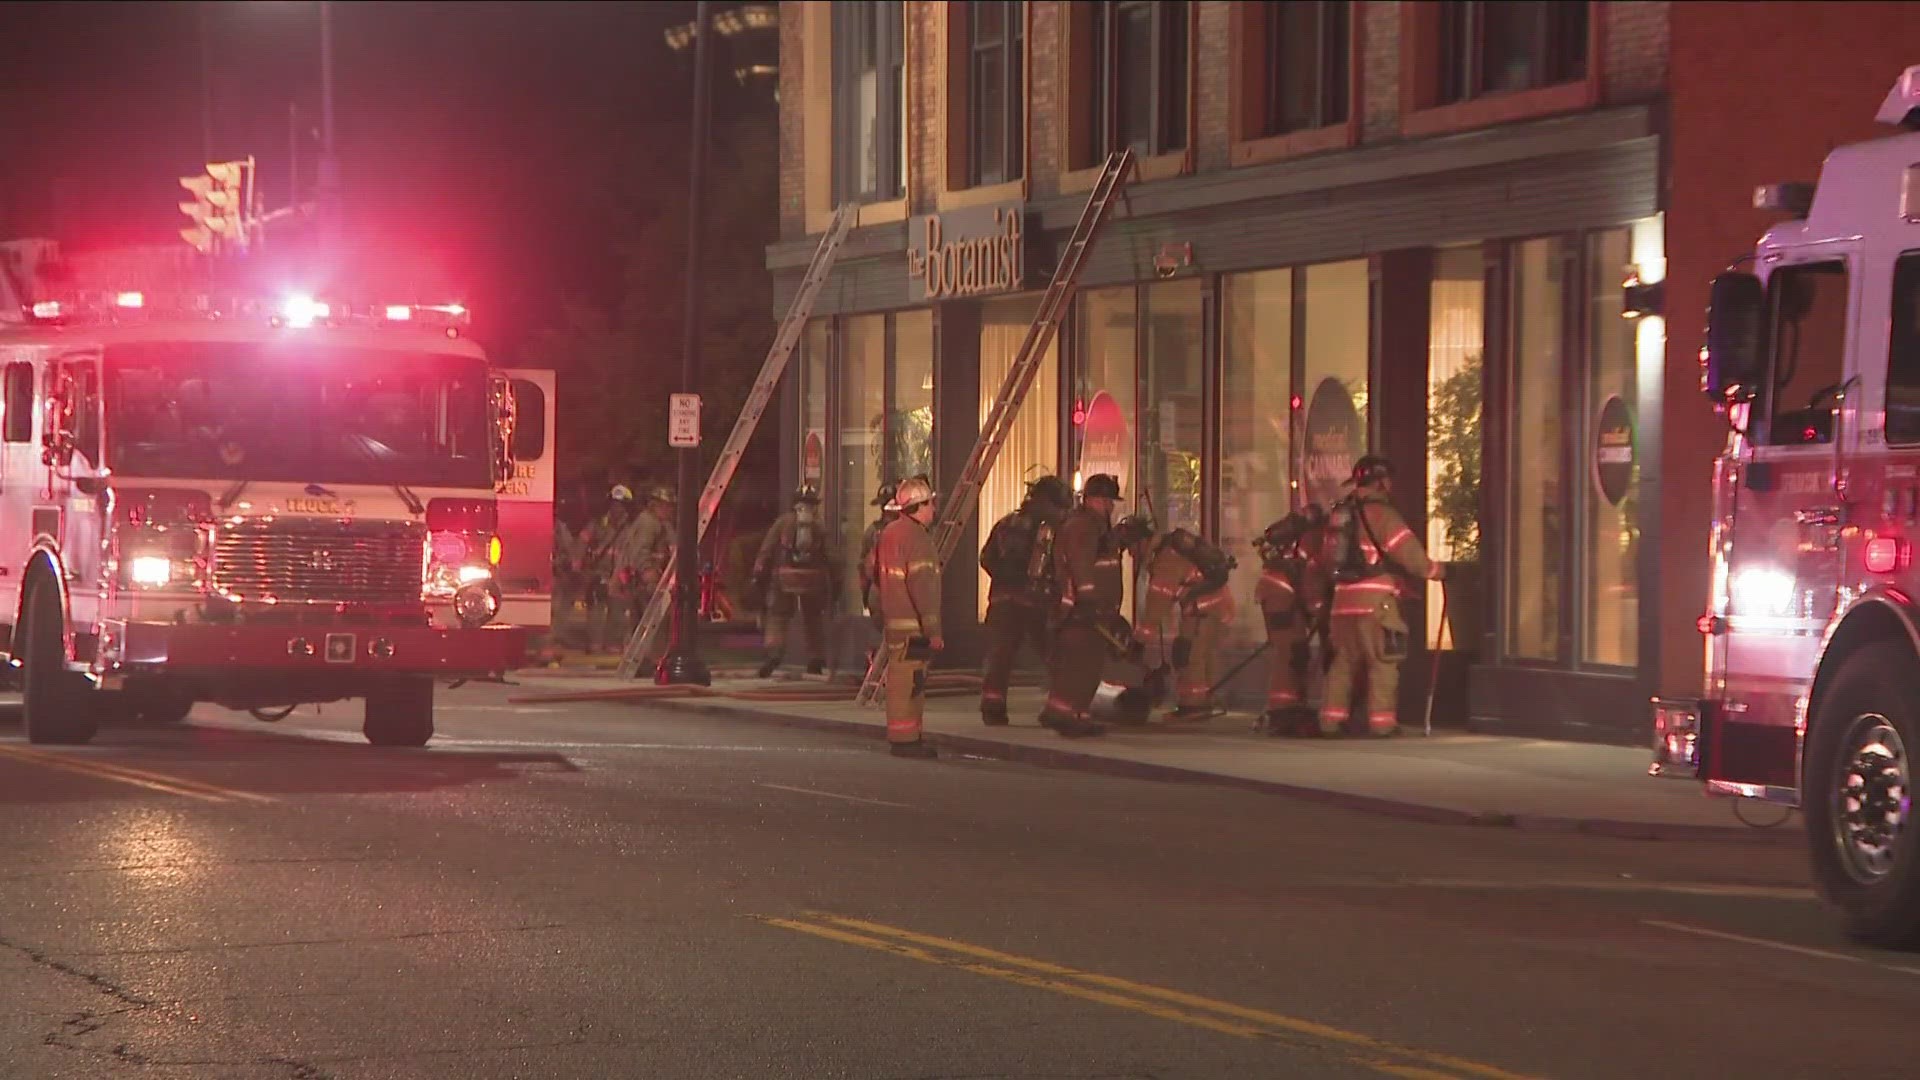 BFD responded to the two-alarm fire at 192 Seneca Street just before 9:10 p.m. Friday night.